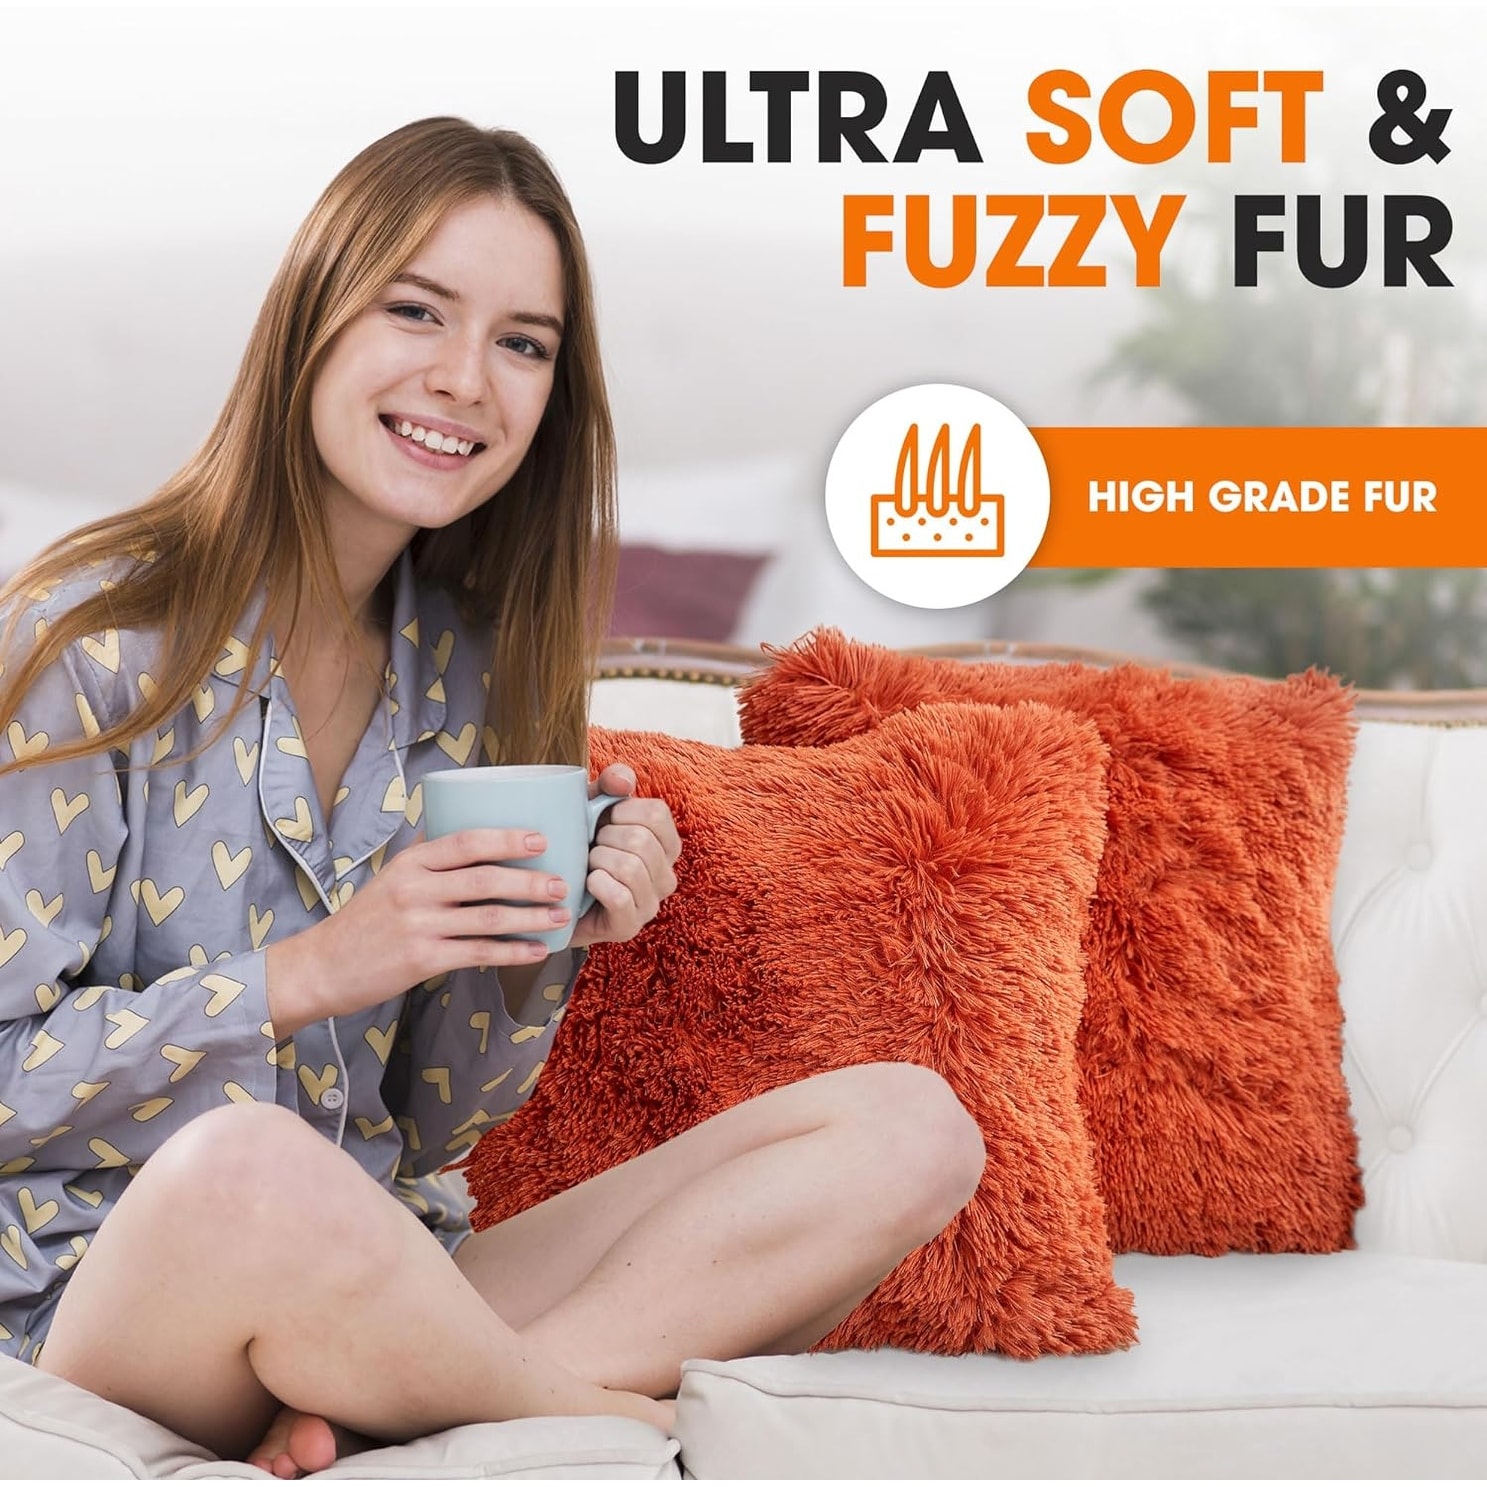 https://ak1.ostkcdn.com/images/products/is/images/direct/05db2335cccc57c8ffe7ede2f92f4ba643d5f30a/Cheer-Collection-Shaggy-Long-Hair-Throw-Pillows-%28Set-of-2%29.jpg